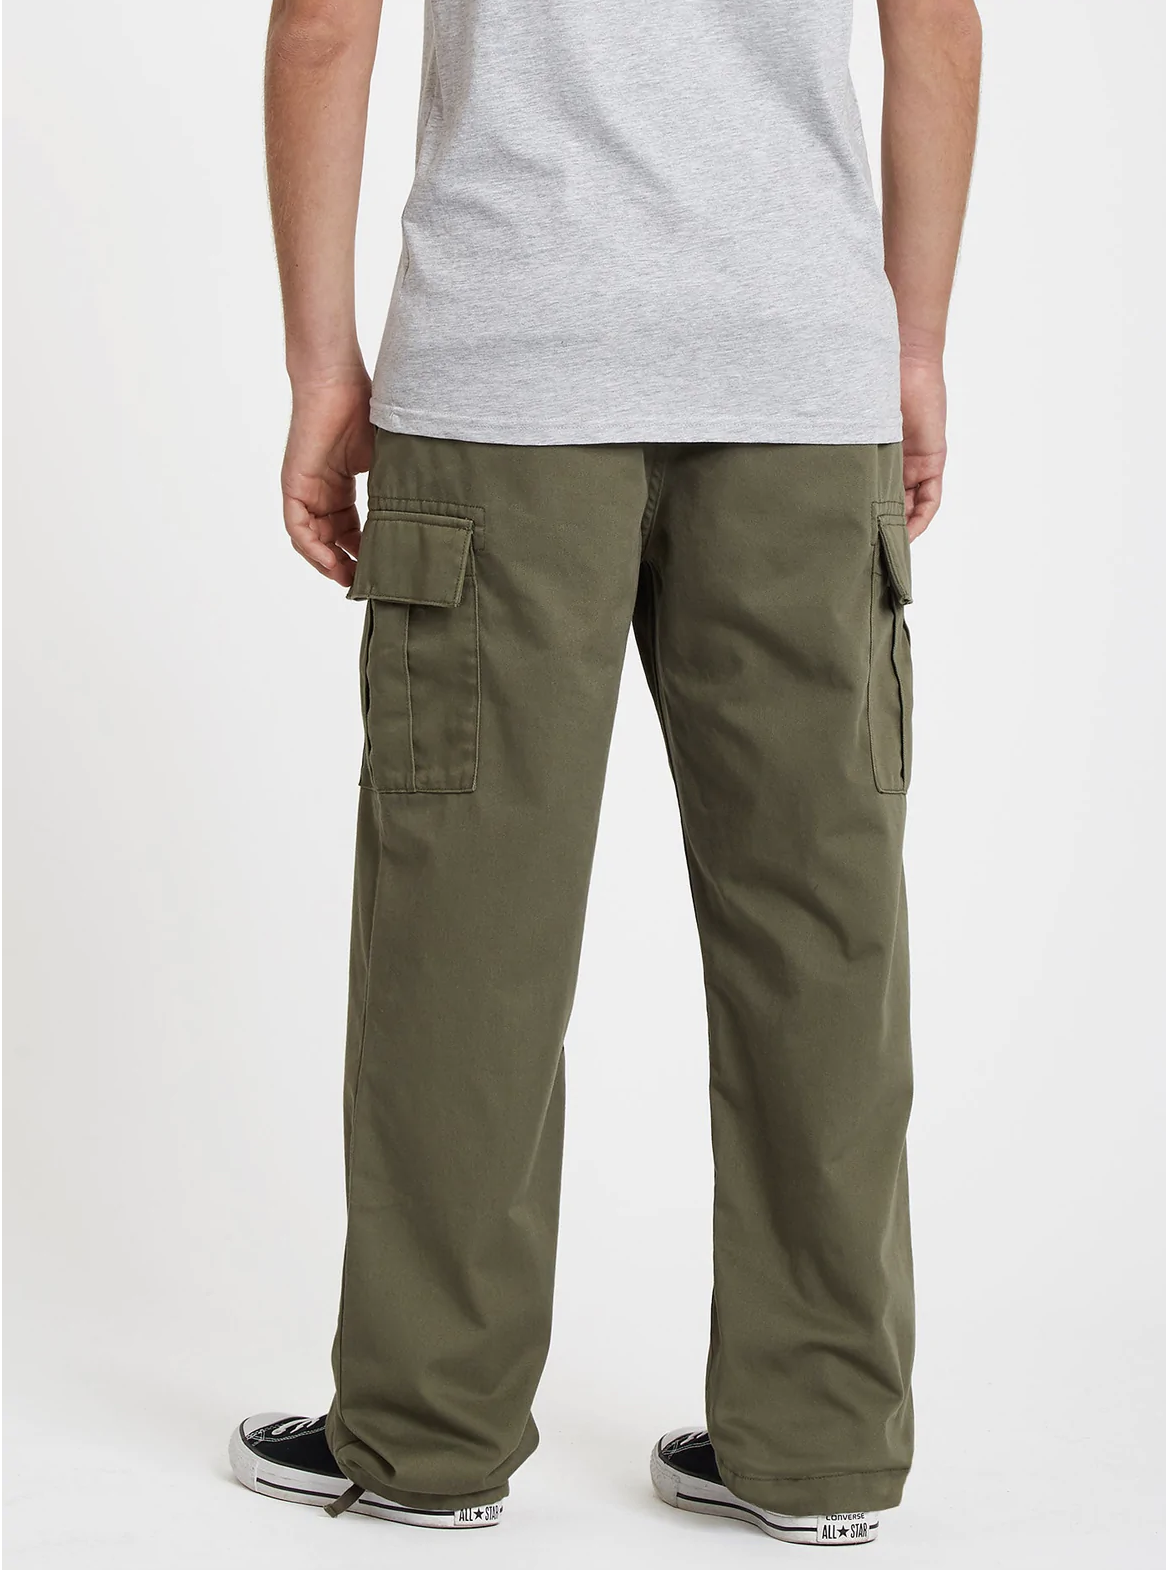 MARCH CARGO PANT MILITARY VOLCOM